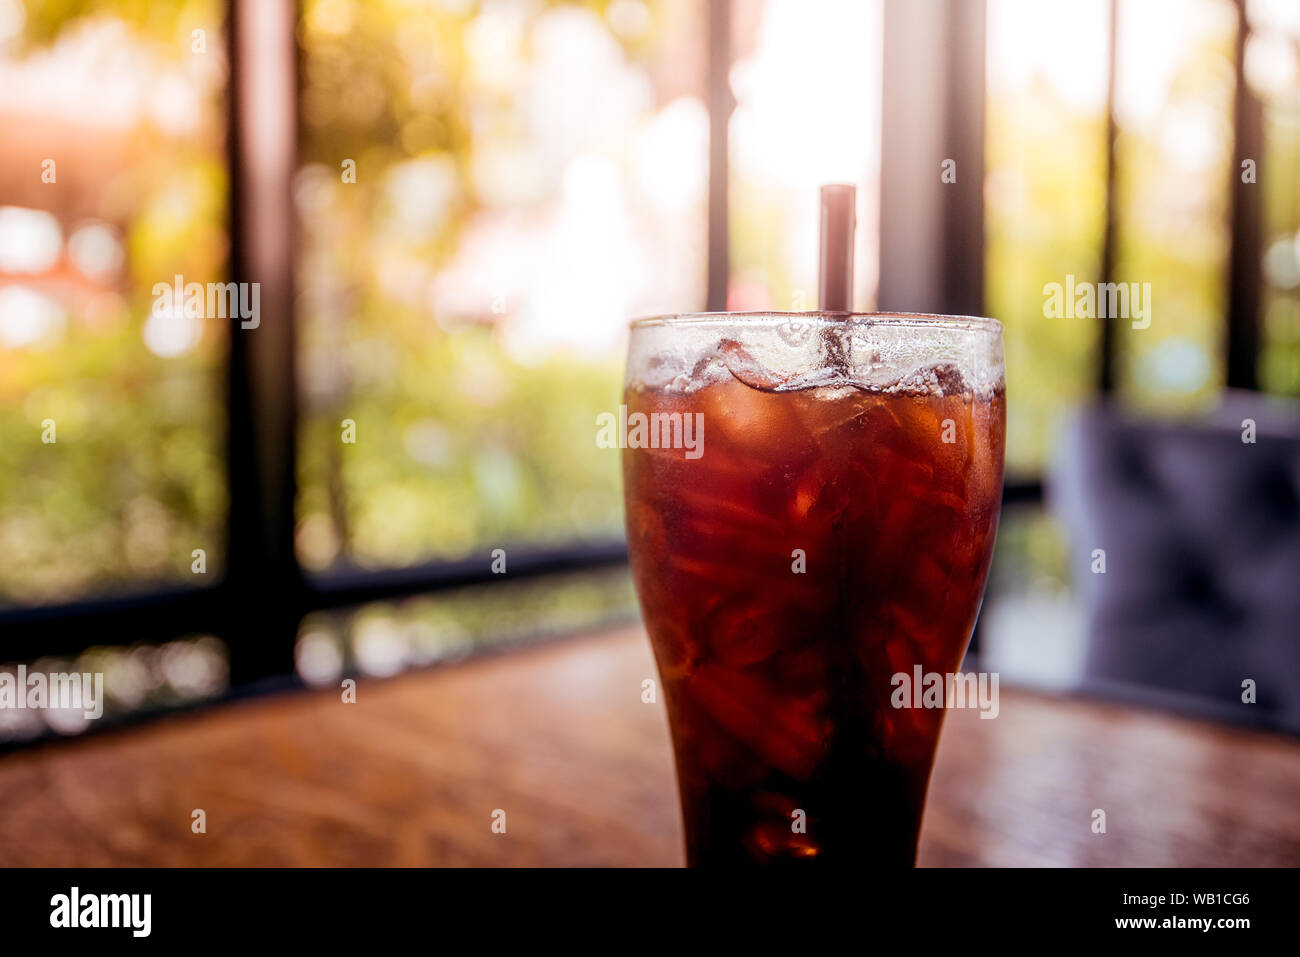 ice coffee on wooden background Stock Photo